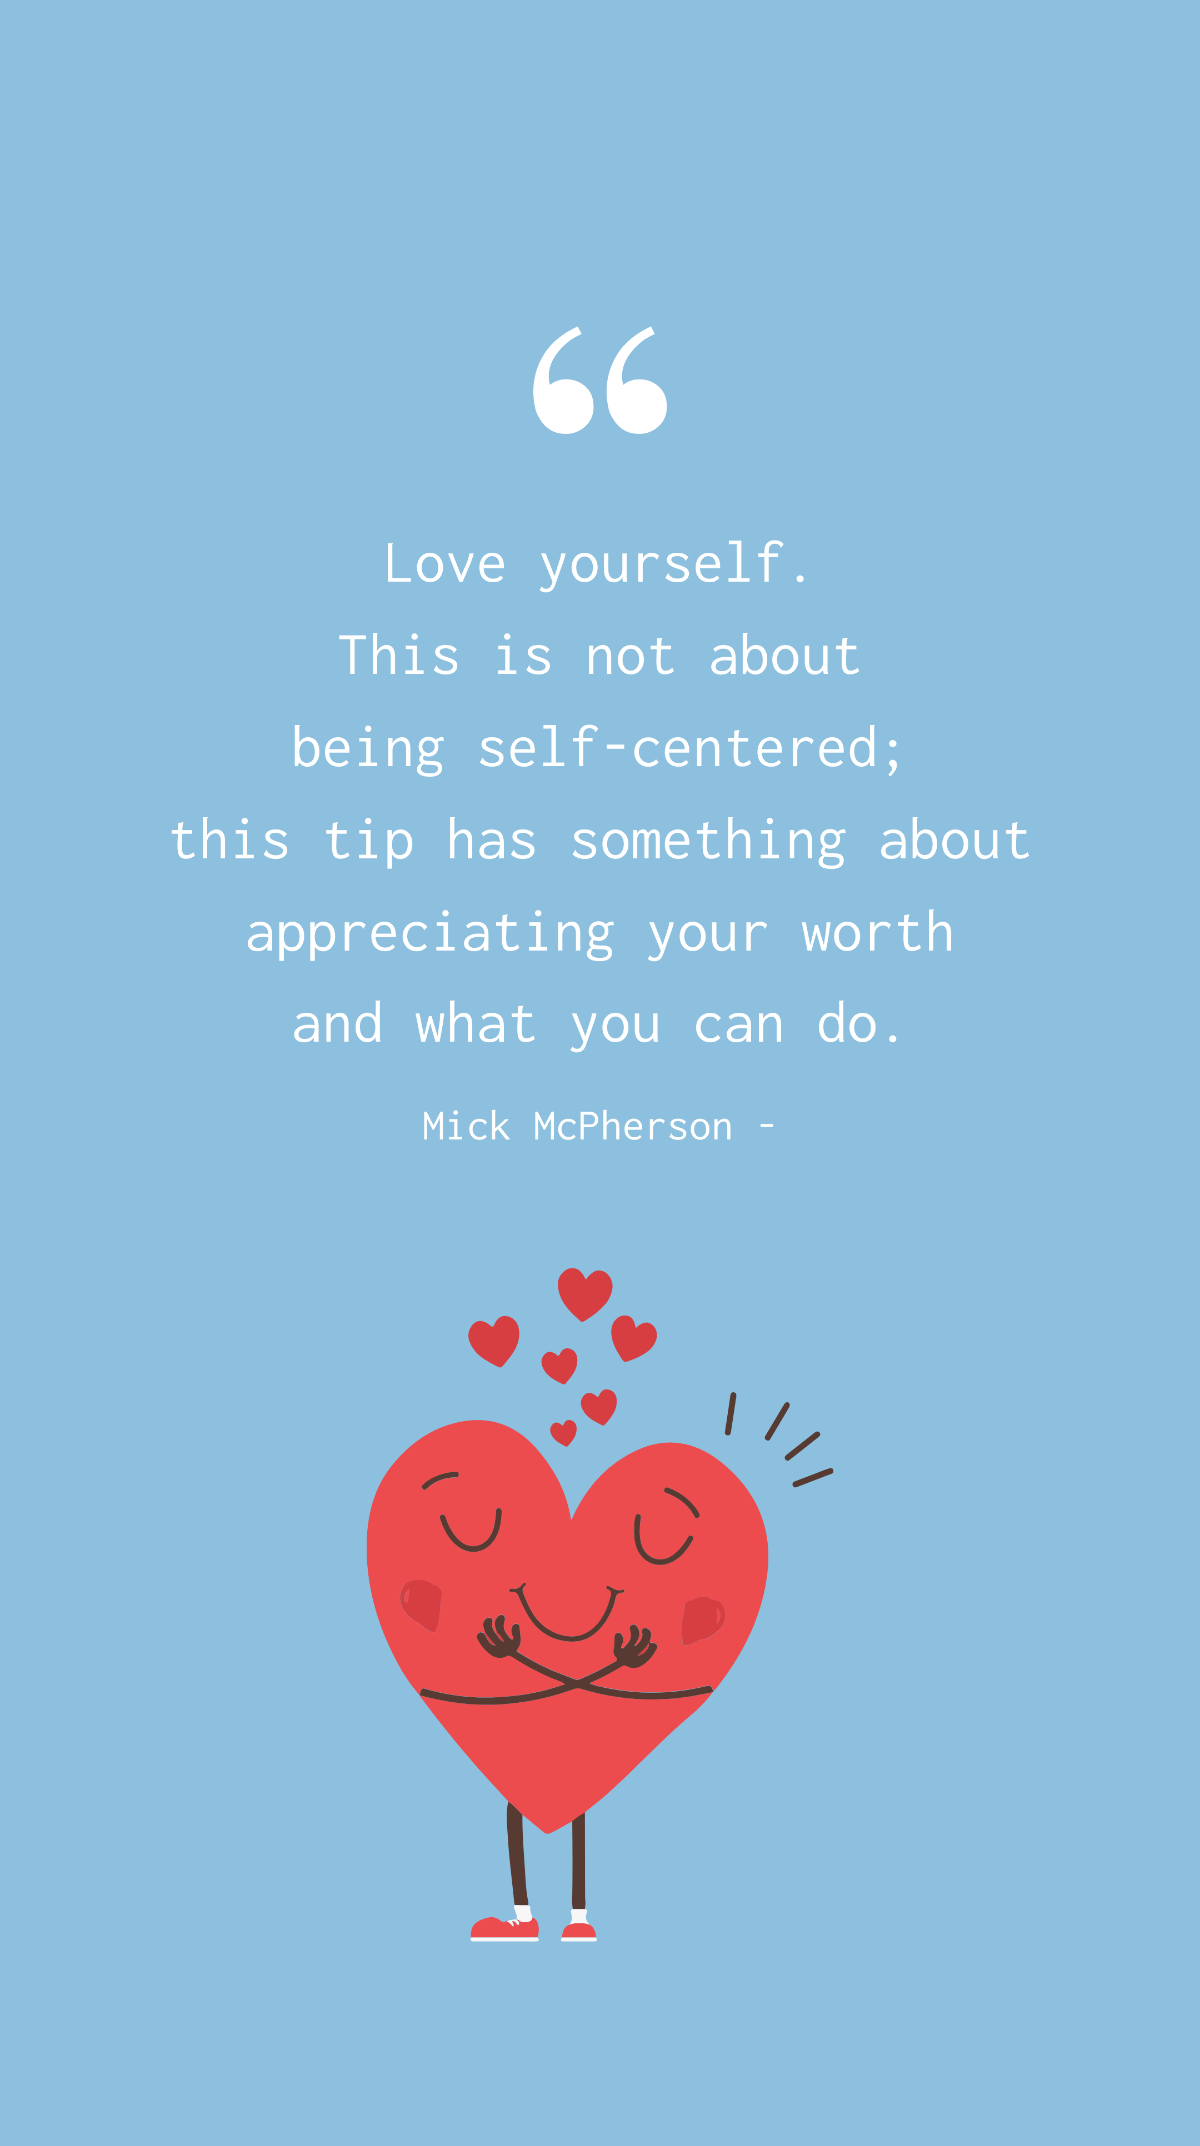 Mick McPherson - Love yourself. This is not about being self-centered; this tip has something about appreciating your worth and what you can do.